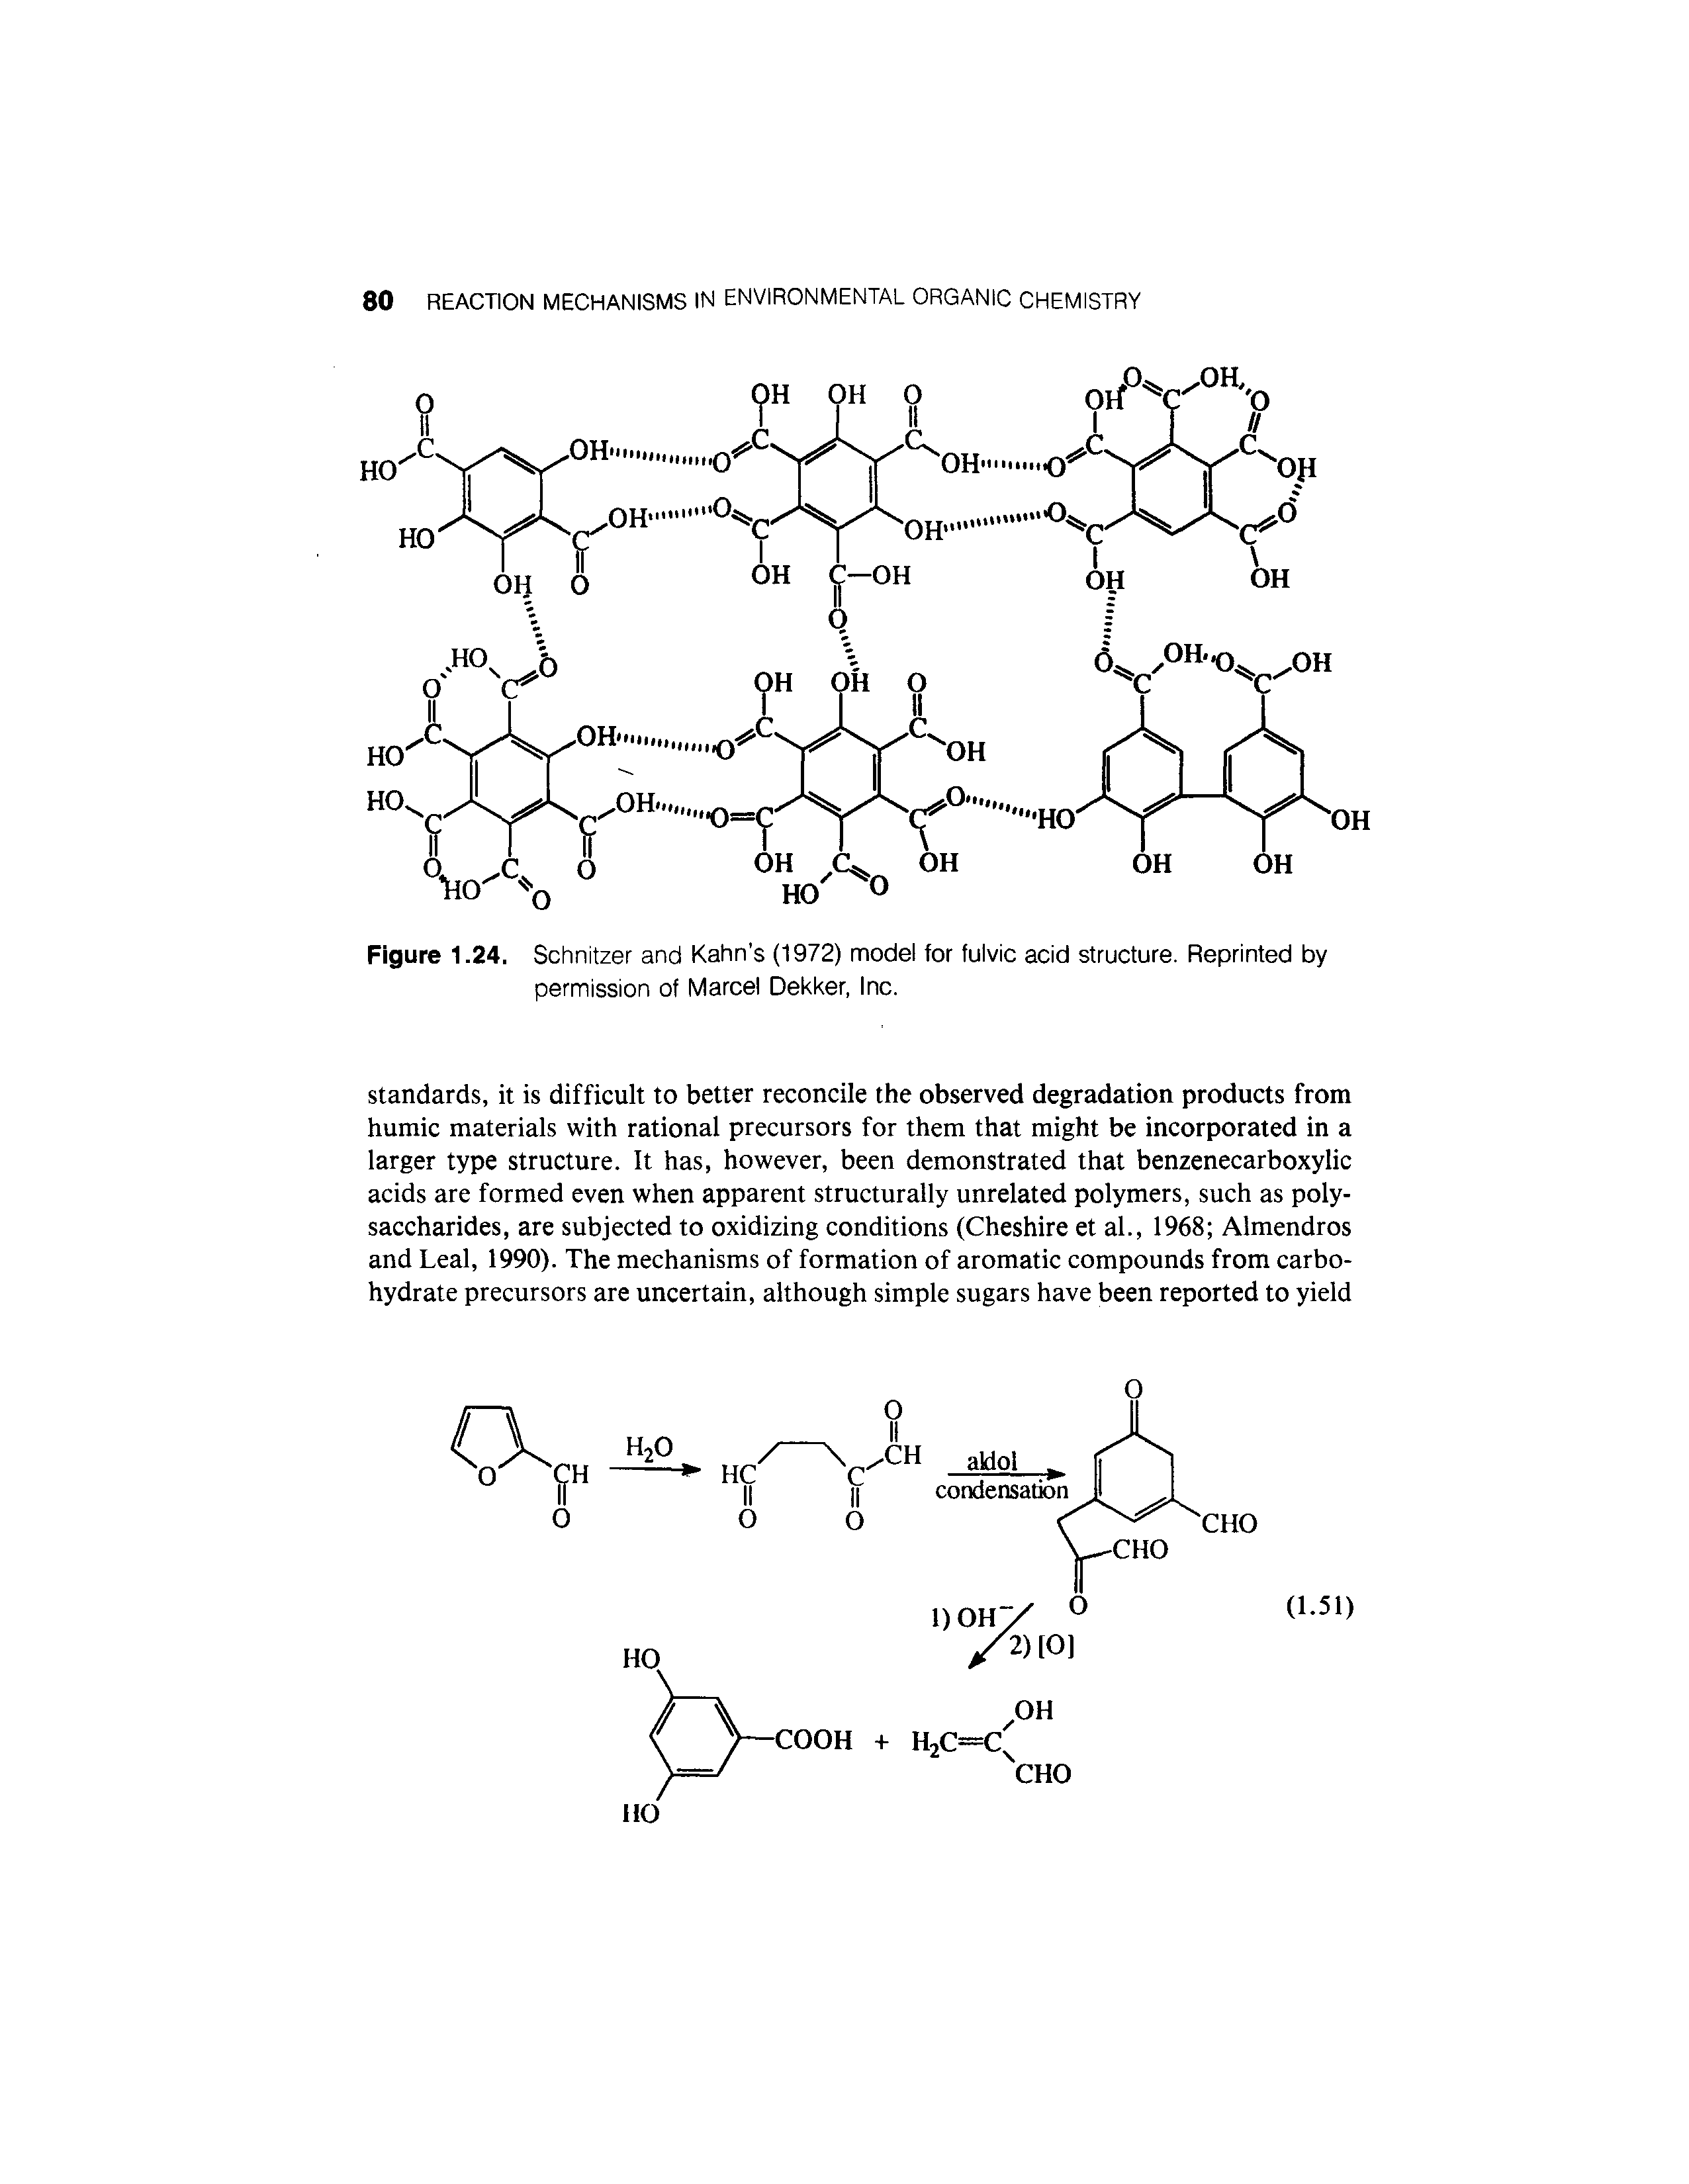 Figure 1.24. Schnitzer and Kahn s (1972) model for fulvic acid structure. Reprinted by permission of Marcel Dekker, Inc.